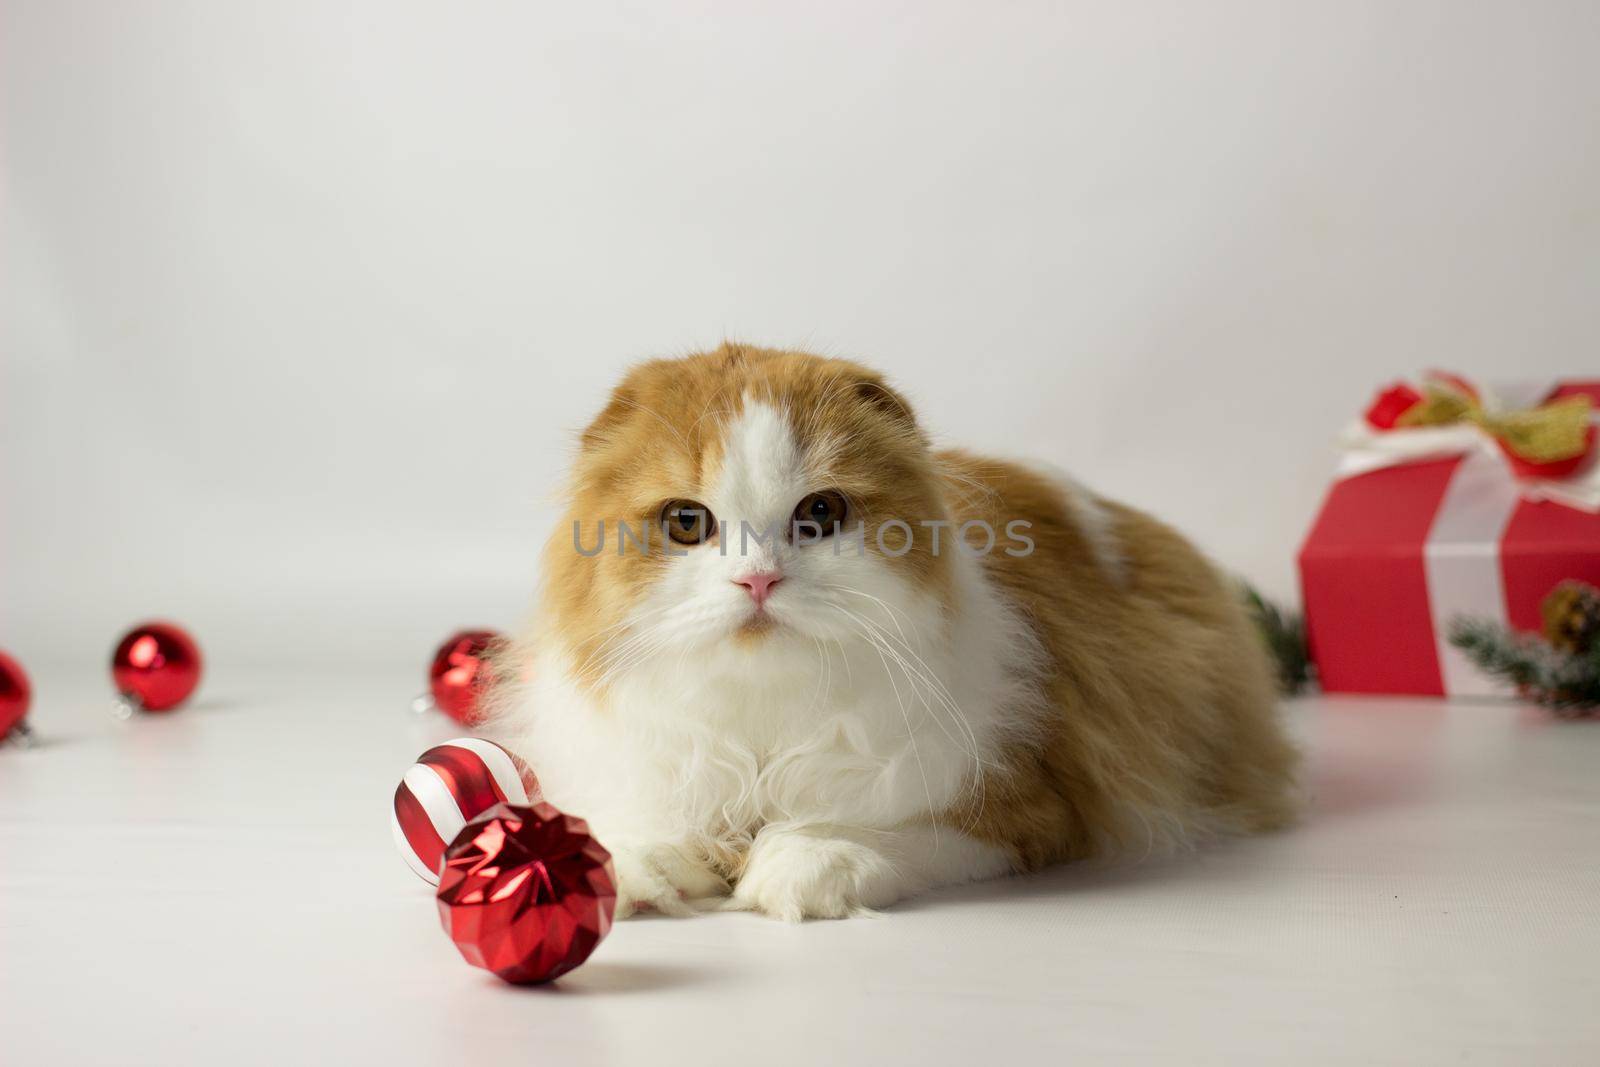 Cute scottish kitten playing in a gift box with Christmas decoration by KatrinBaidimirova